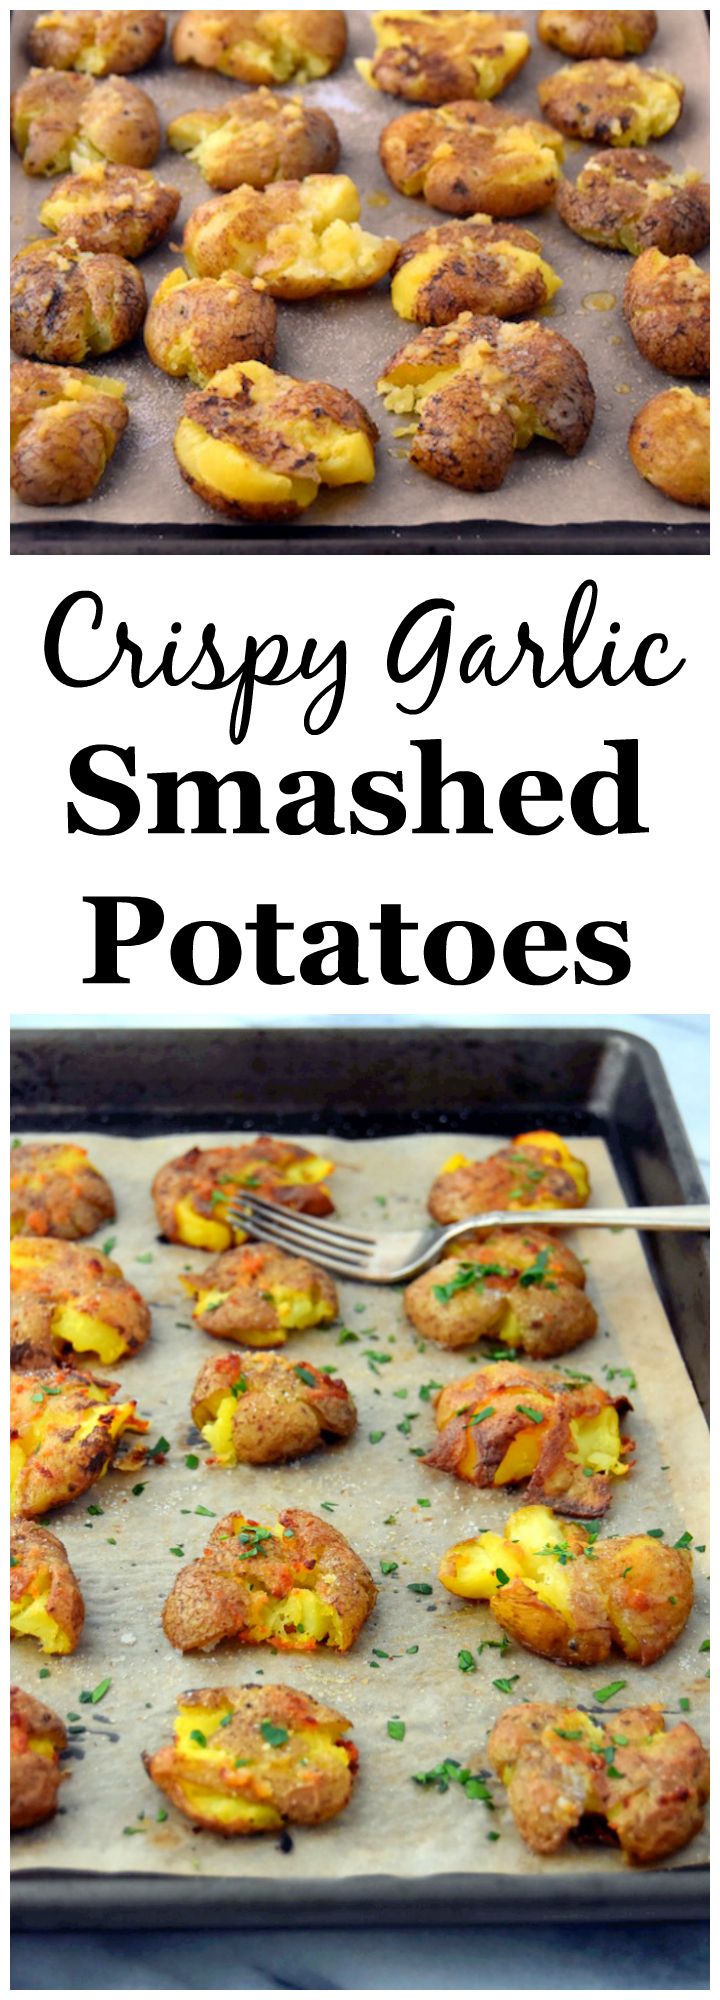 Crispy Garlic Smashed Potatoes - a simple 4 ingredient recipe for the best side dish! | uprootkitchen.com